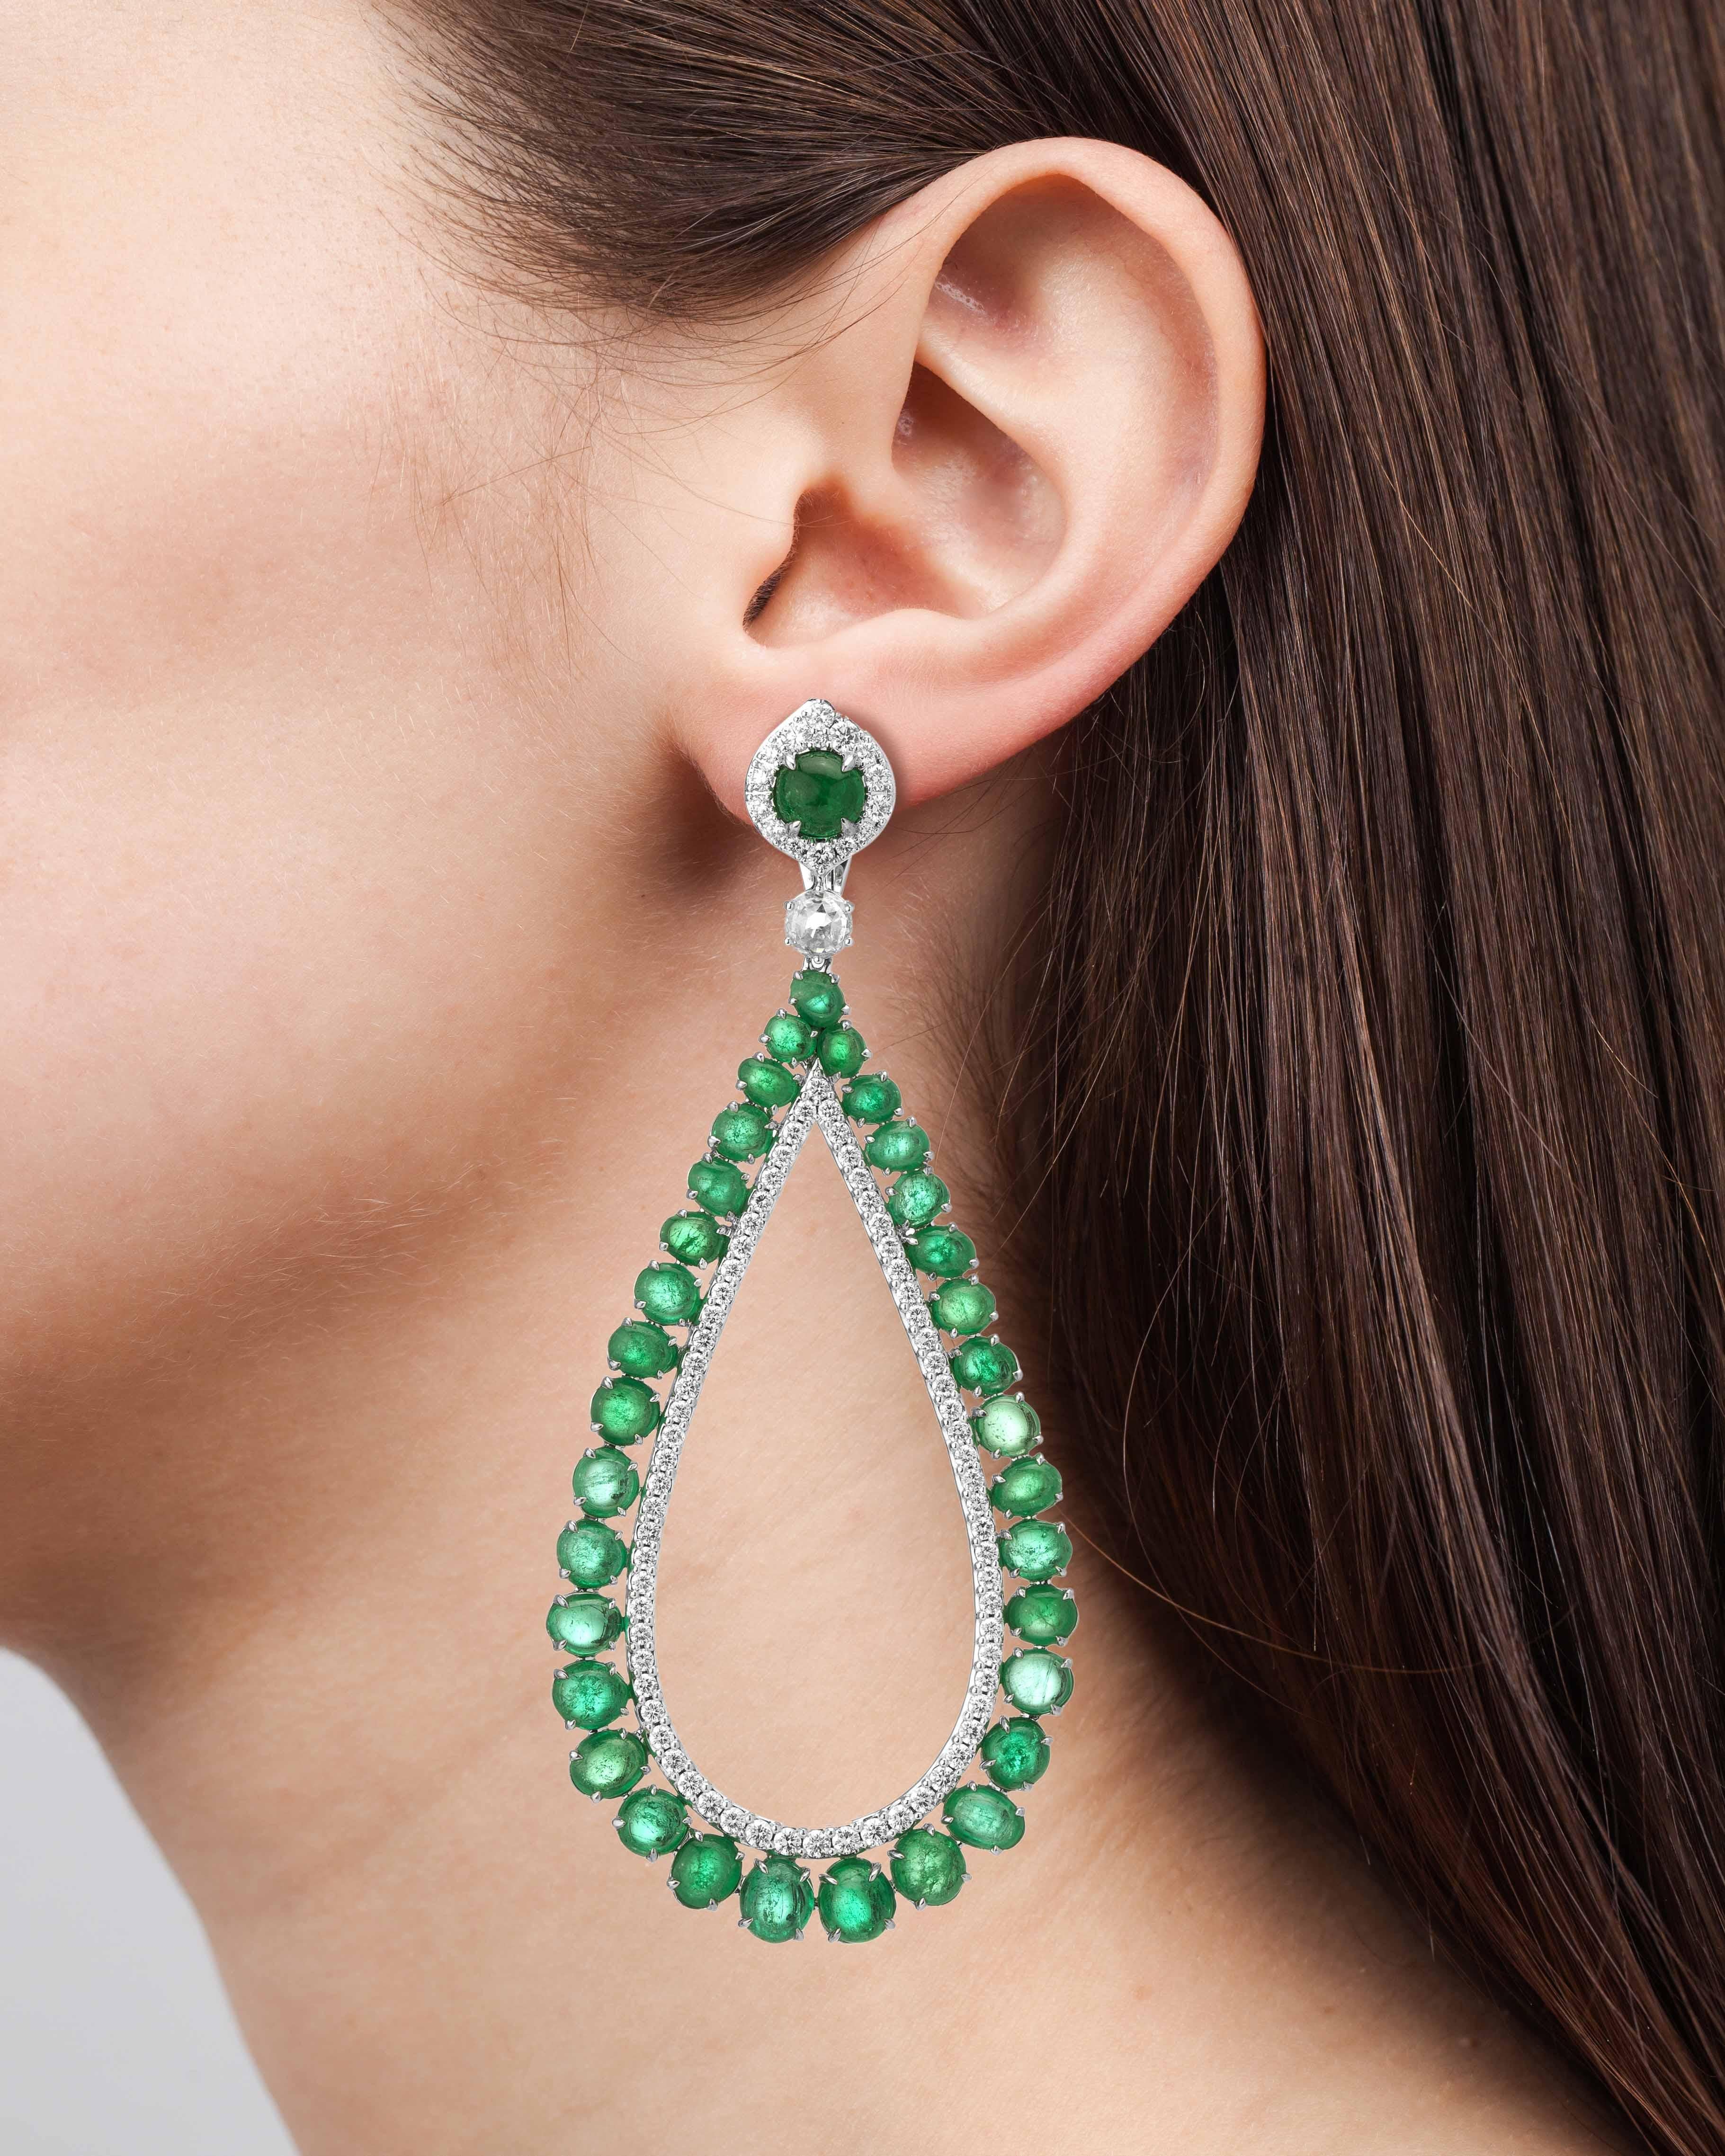 Large modern cocktail earrings set with round brilliant diamonds weighing 6.11 carats accenting the 38.25 carats of Muzo Colombian emeralds.

Muzo Emerald Colombia Heritage Verity Earrings set with 38.25 carats Emerald

Verity is a tribute to the